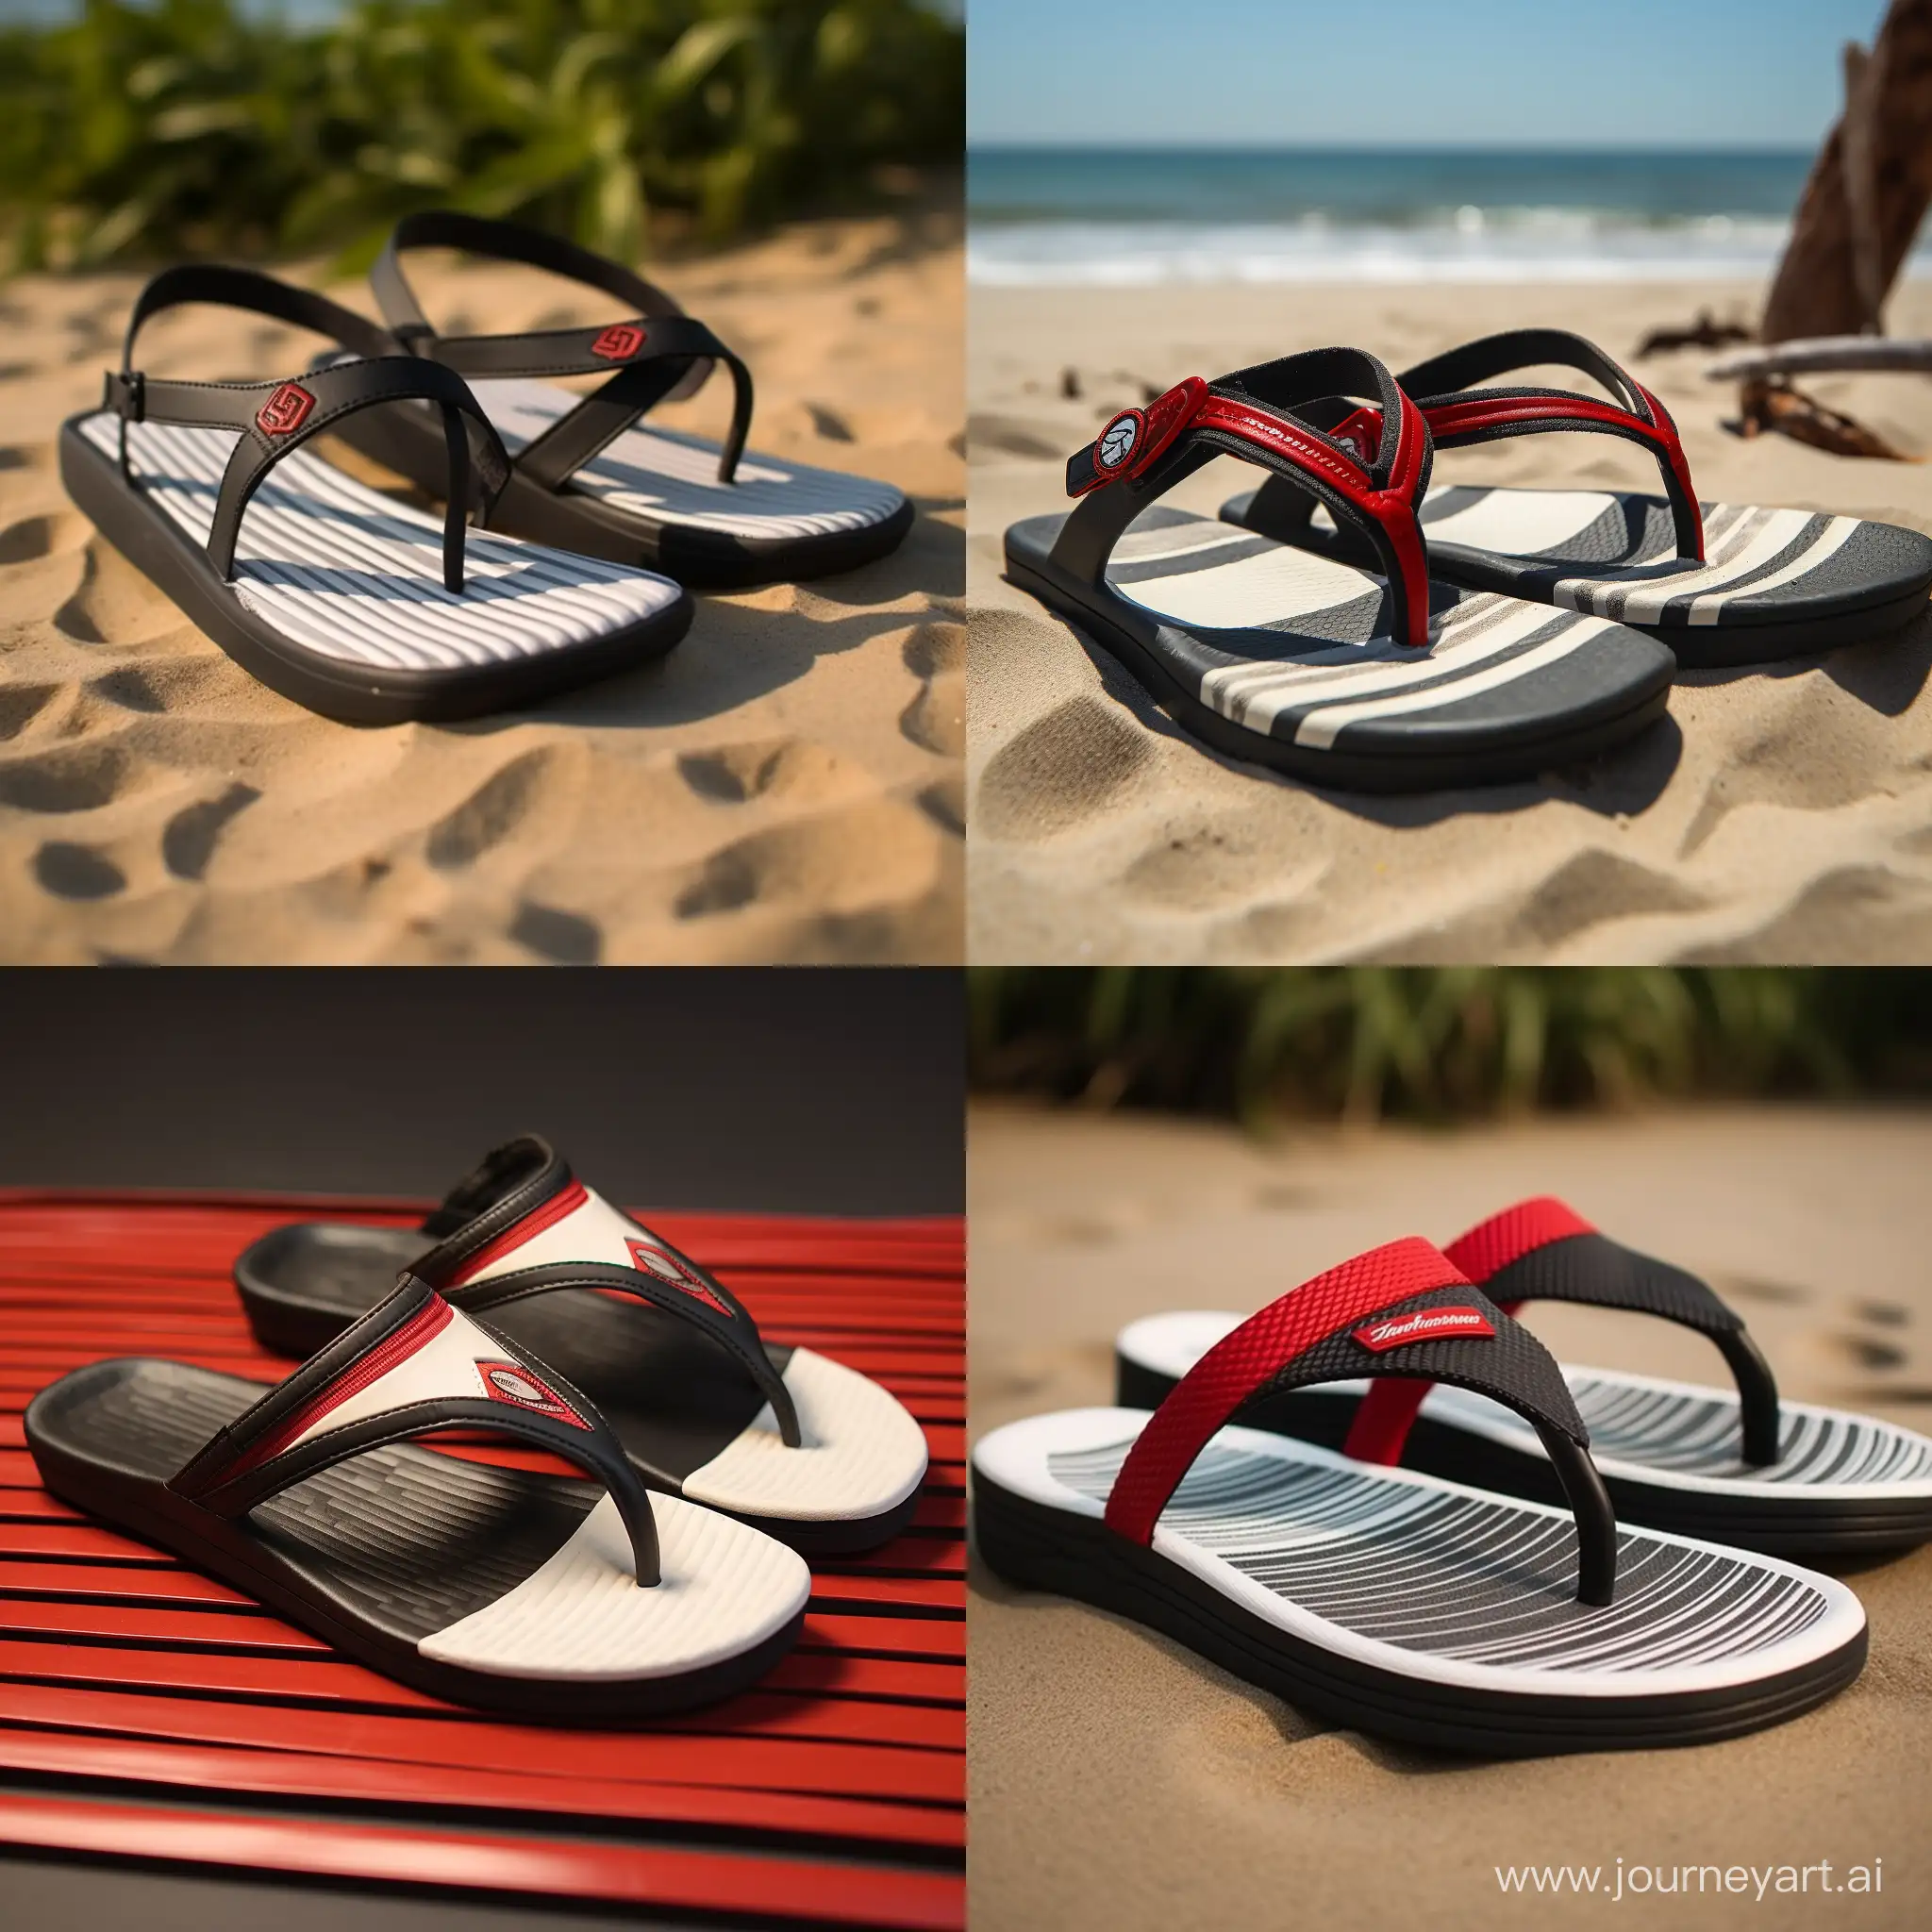 Flip flop like Brazilian Havaianas with sole in white and stripes in black with a small piece in red like in the jiu jitsu black belt